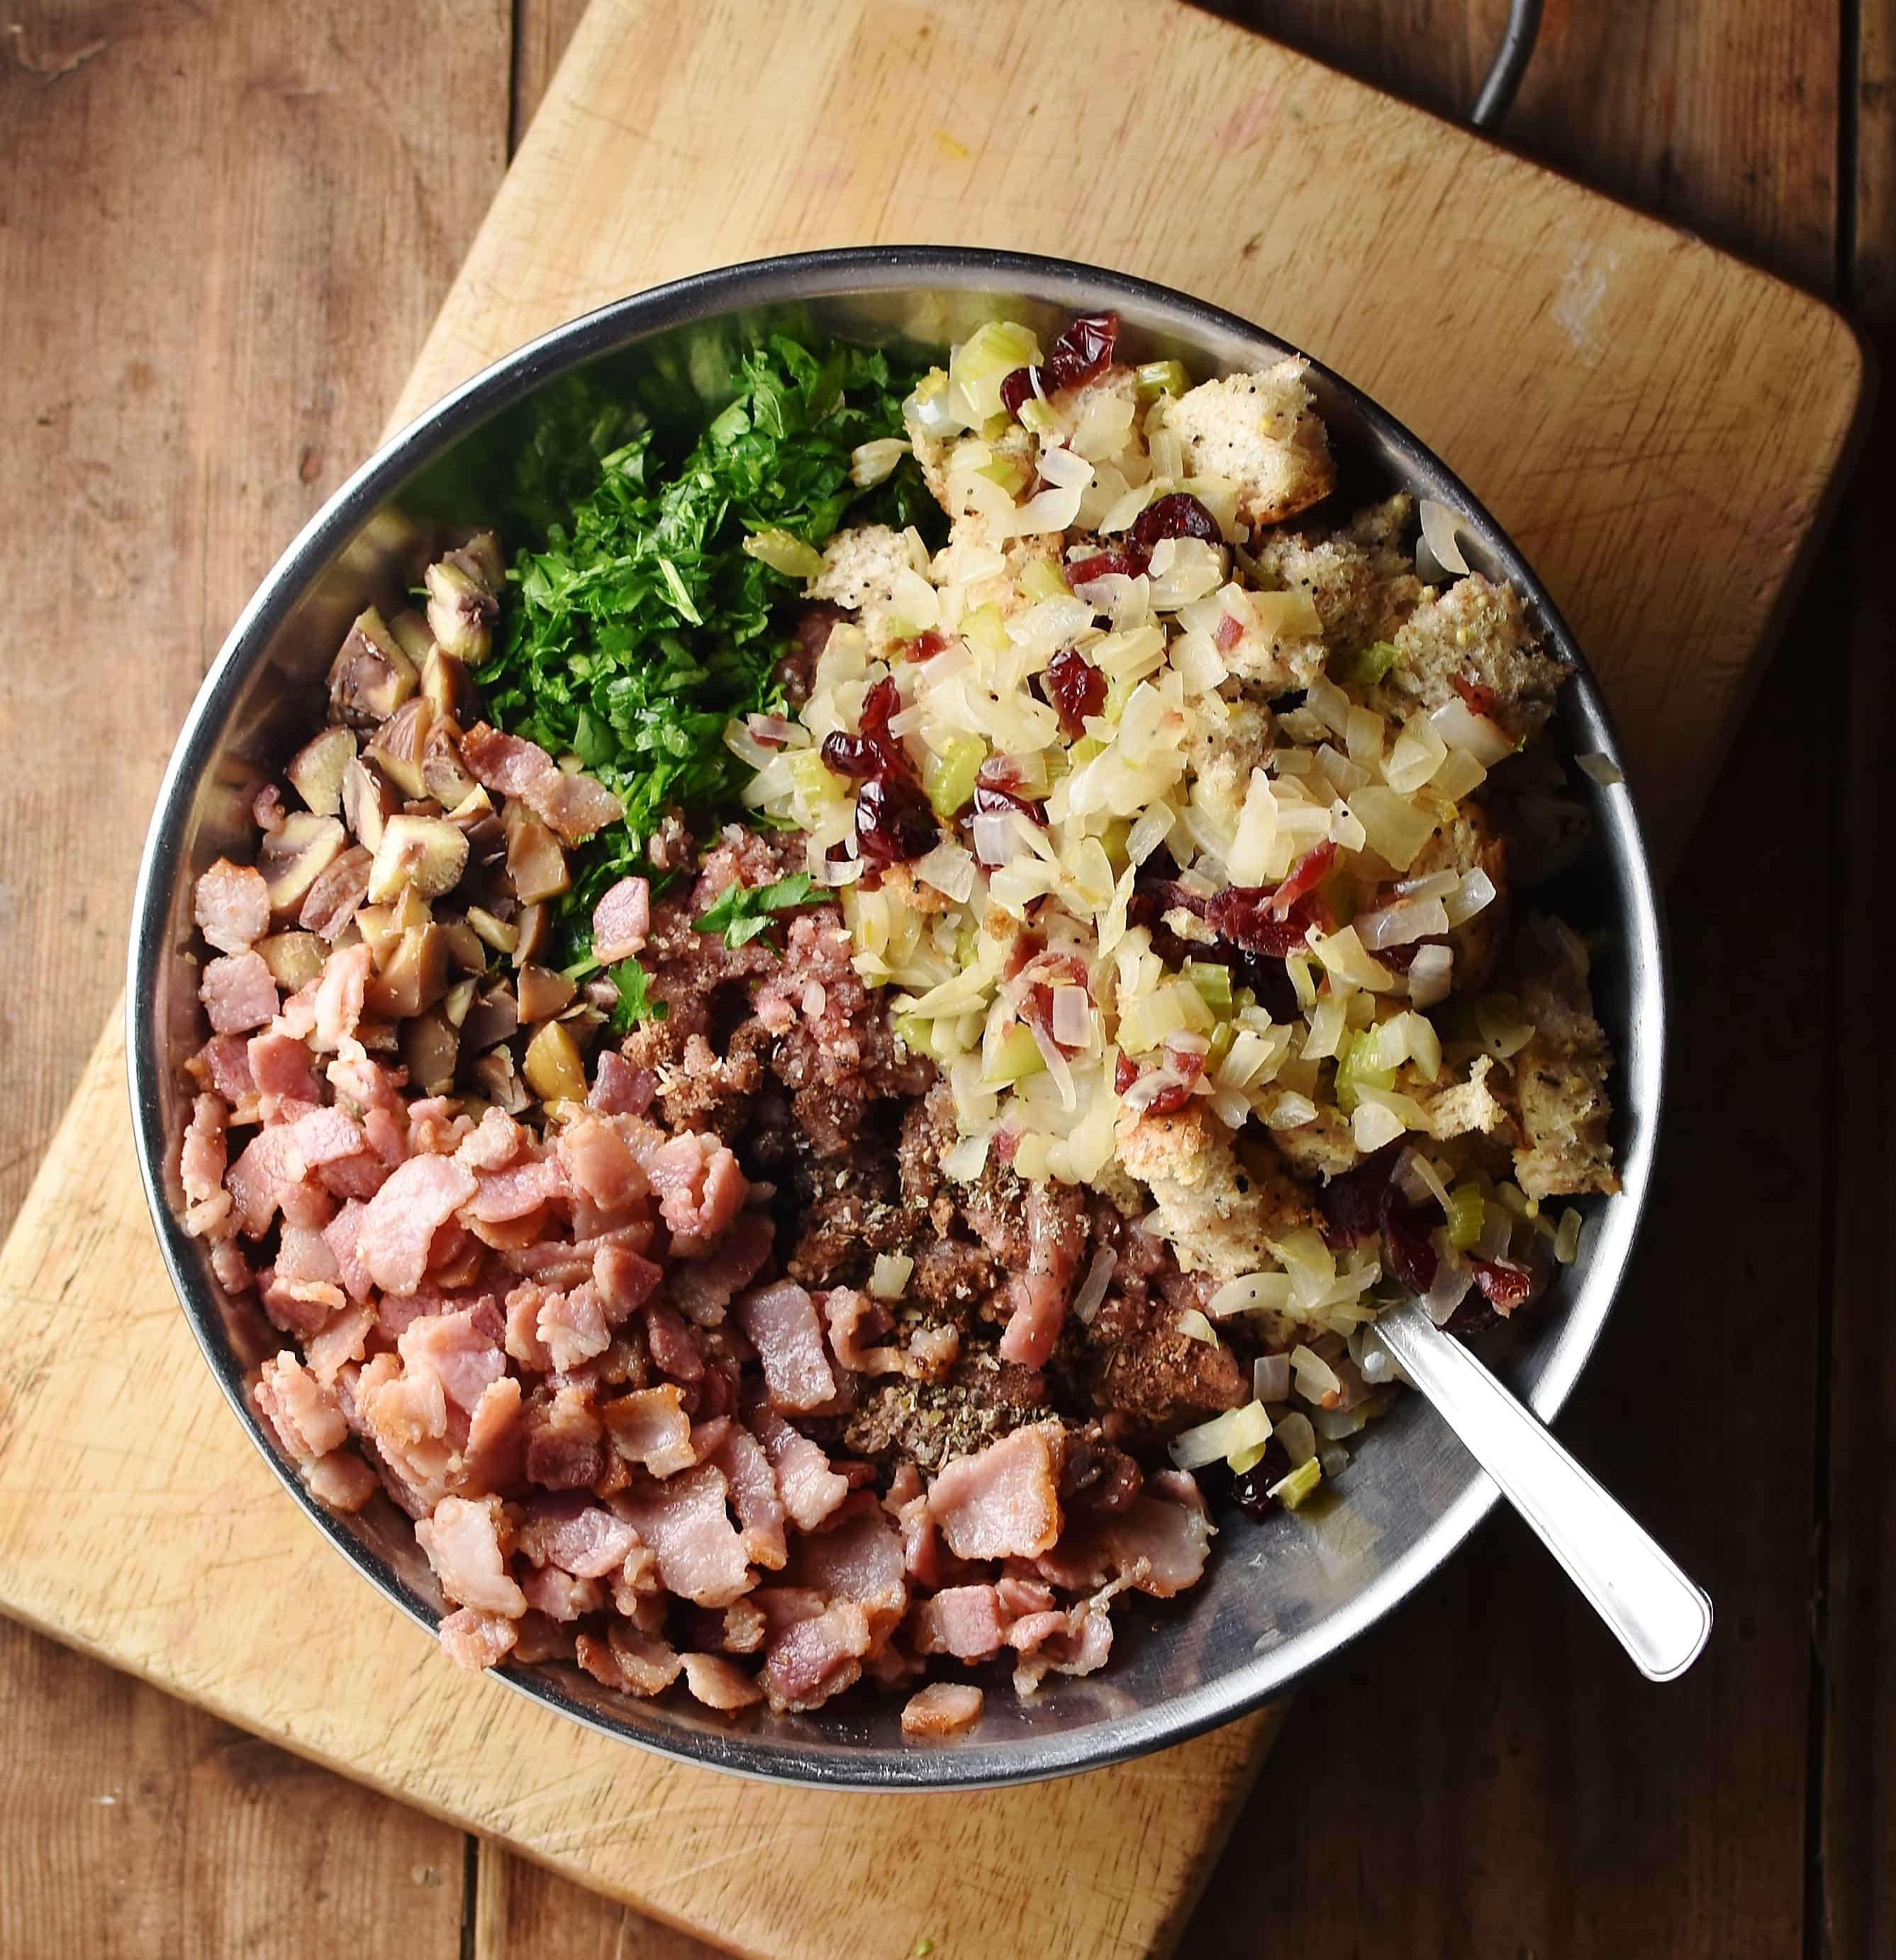 Bacon pieces, herbs, ground turkey, cranberries, chestnuts and chopped onions in large metal bowl with spoon on top of wooden board.